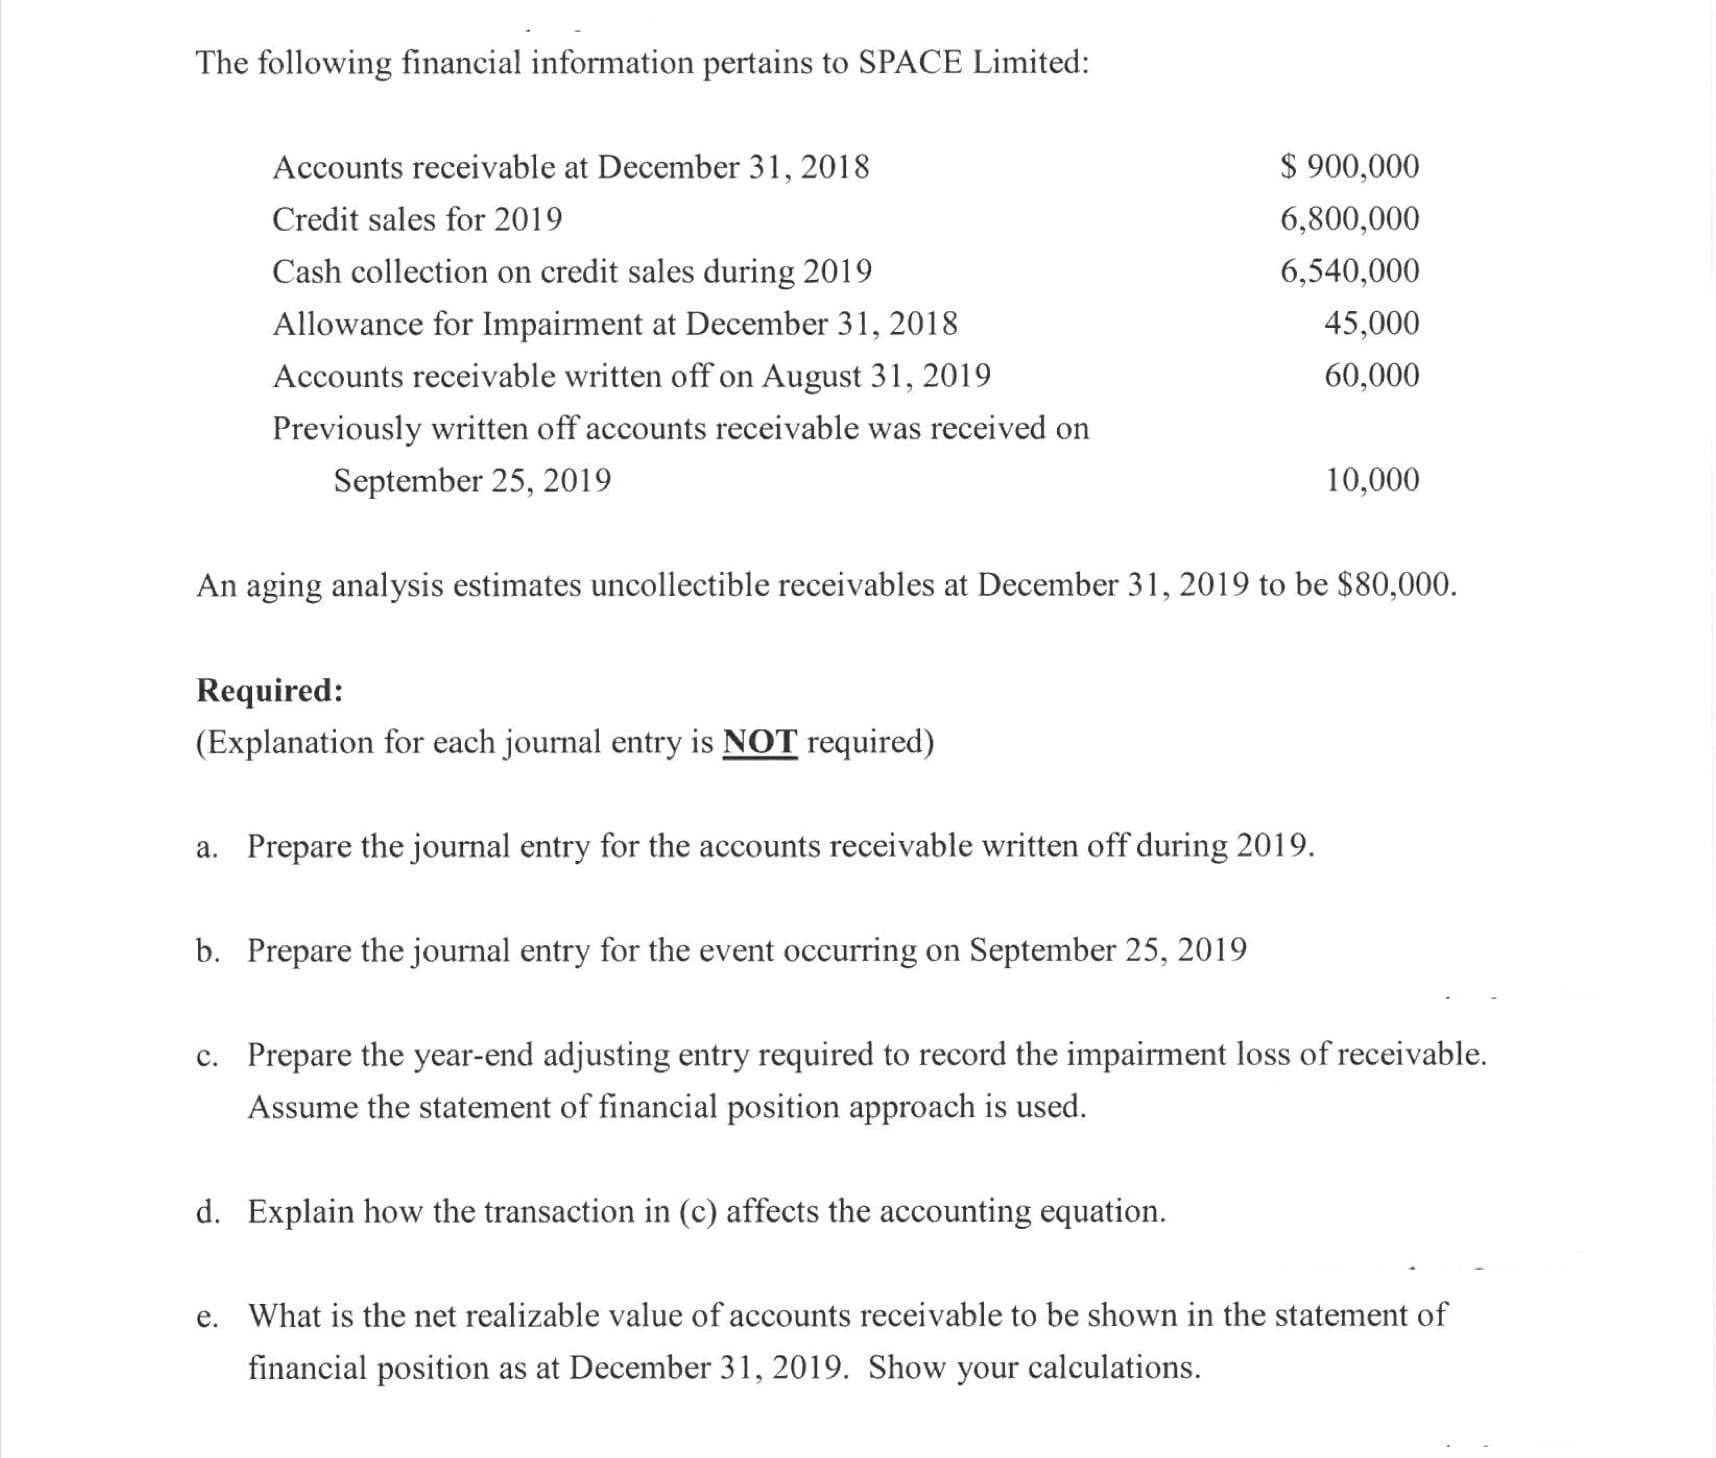 The following financial information pertains to SPACE Limited:
Accounts receivable at December 31, 2018
$ 900,000
Credit sales for 2019
6,800,000
Cash collection on credit sales during 2019
6,540,000
Allowance for Impairment at December 31, 2018
45,000
Accounts receivable written off on August 31, 2019
60,000
Previously written off accounts receivable was received on
September 25, 2019
10,000
An aging analysis estimates uncollectible receivables at December 31, 2019 to be $80,000.
Required:
(Explanation for each journal entry is NOT required)
a. Prepare the journal entry for the accounts receivable written off during 2019.
b. Prepare the journal entry for the event occurring on September 25, 2019
c. Prepare the year-end adjusting entry required to record the impairment loss of receivable.
Assume the statement of financial position approach is used.
d. Explain how the transaction in (c) affects the accounting equation.
e. What is the net realizable value of accounts receivable to be shown in the statement of
financial position as at December 31, 2019. Show your calculations.
